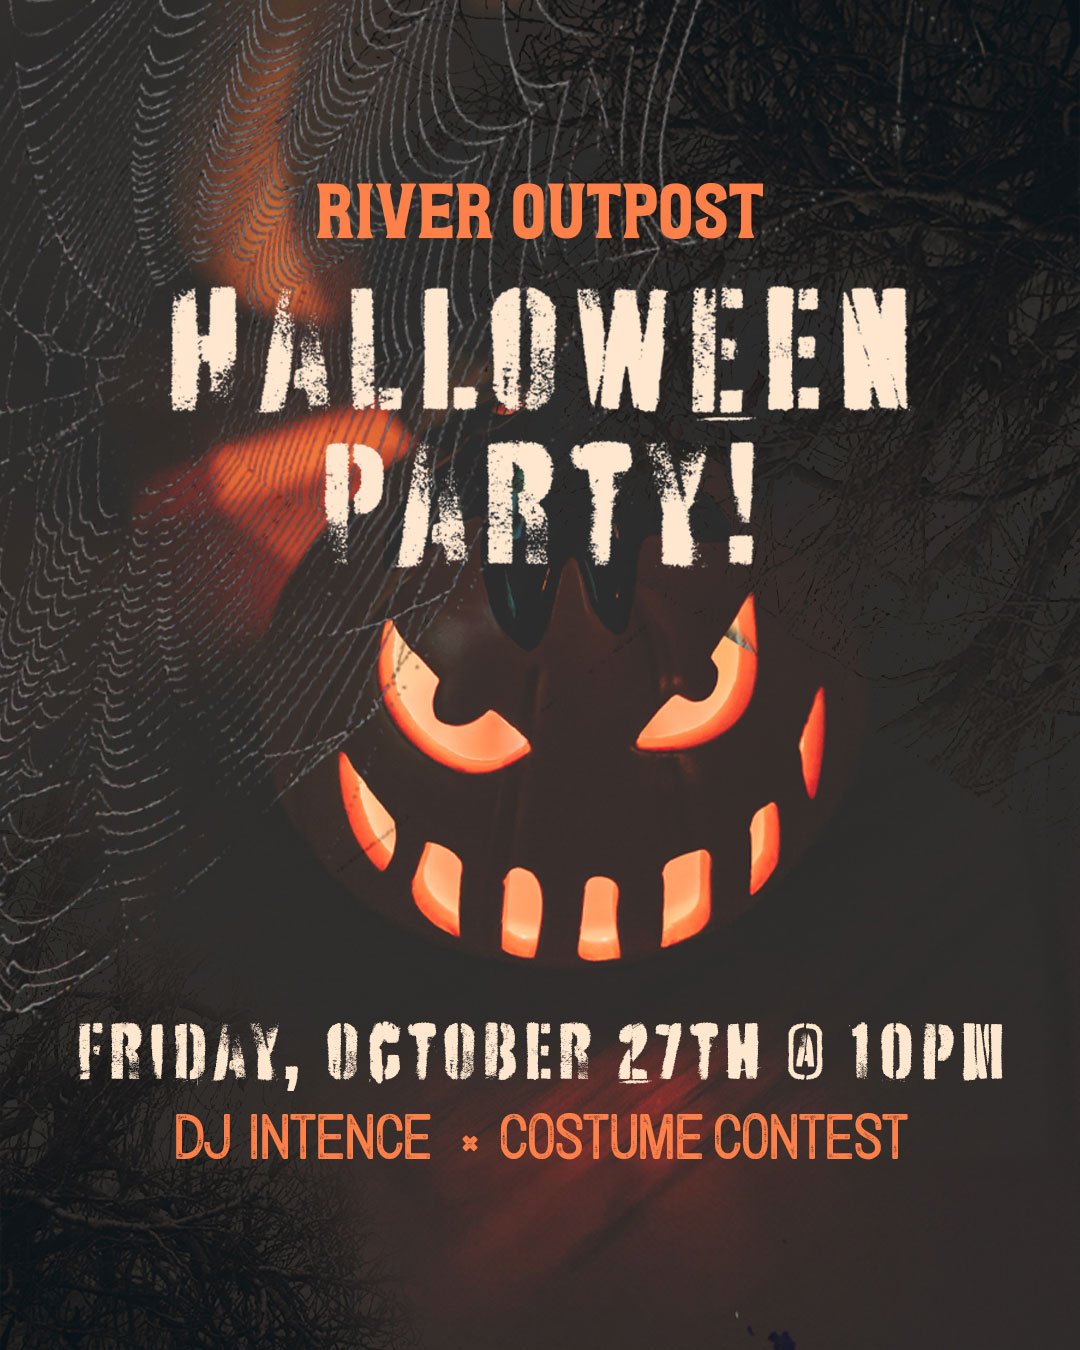 Flier for River Outpost Halloween Party